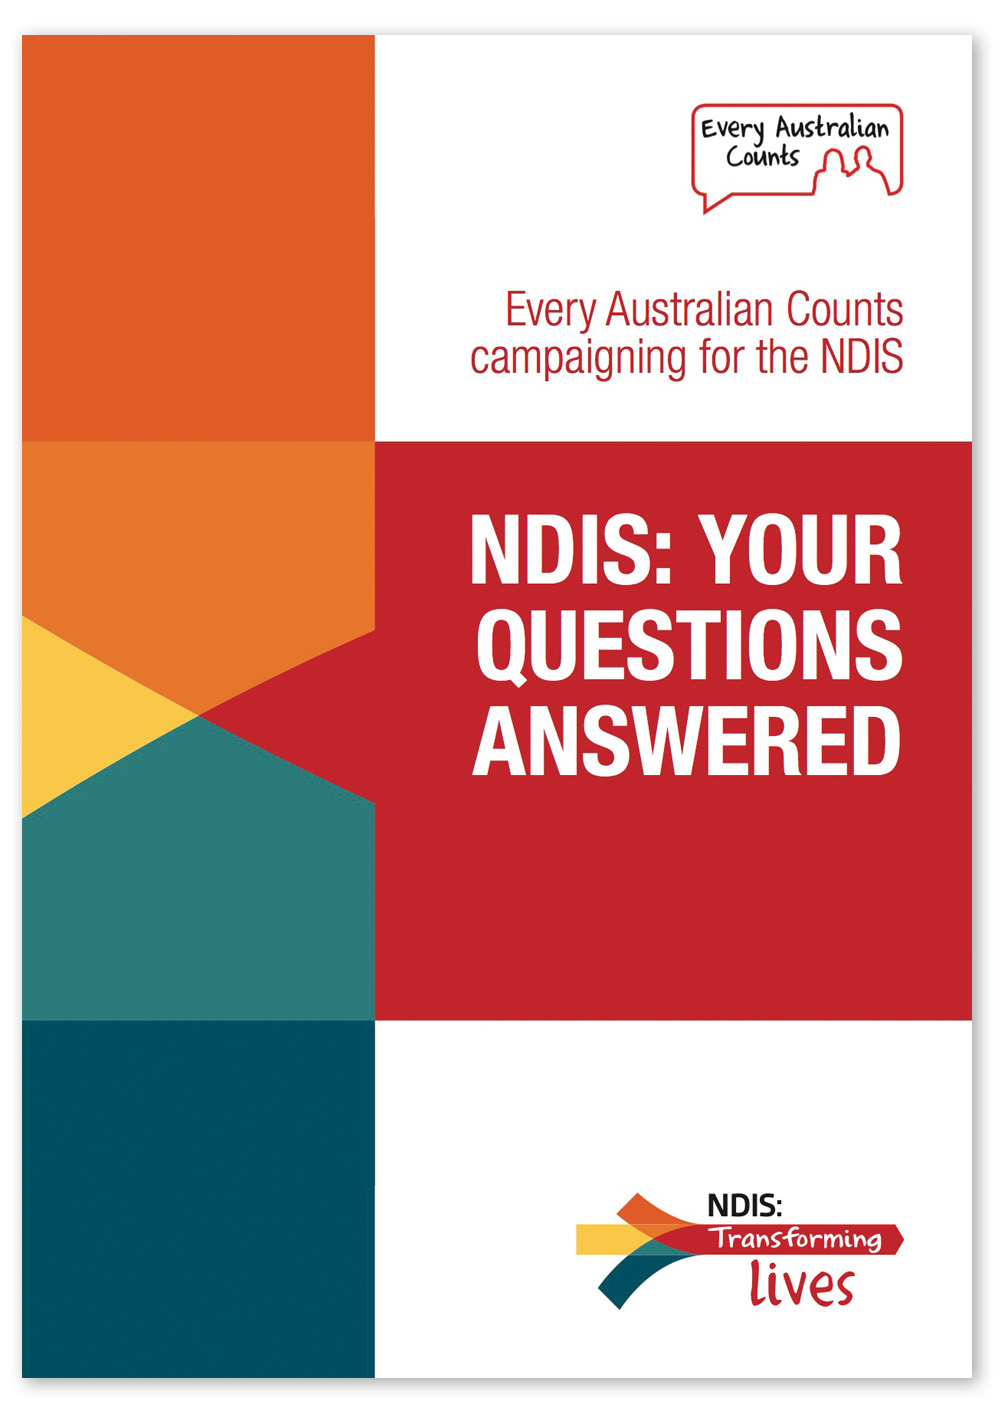 Screenshot of the cover of the NDIS Q&A booklet.